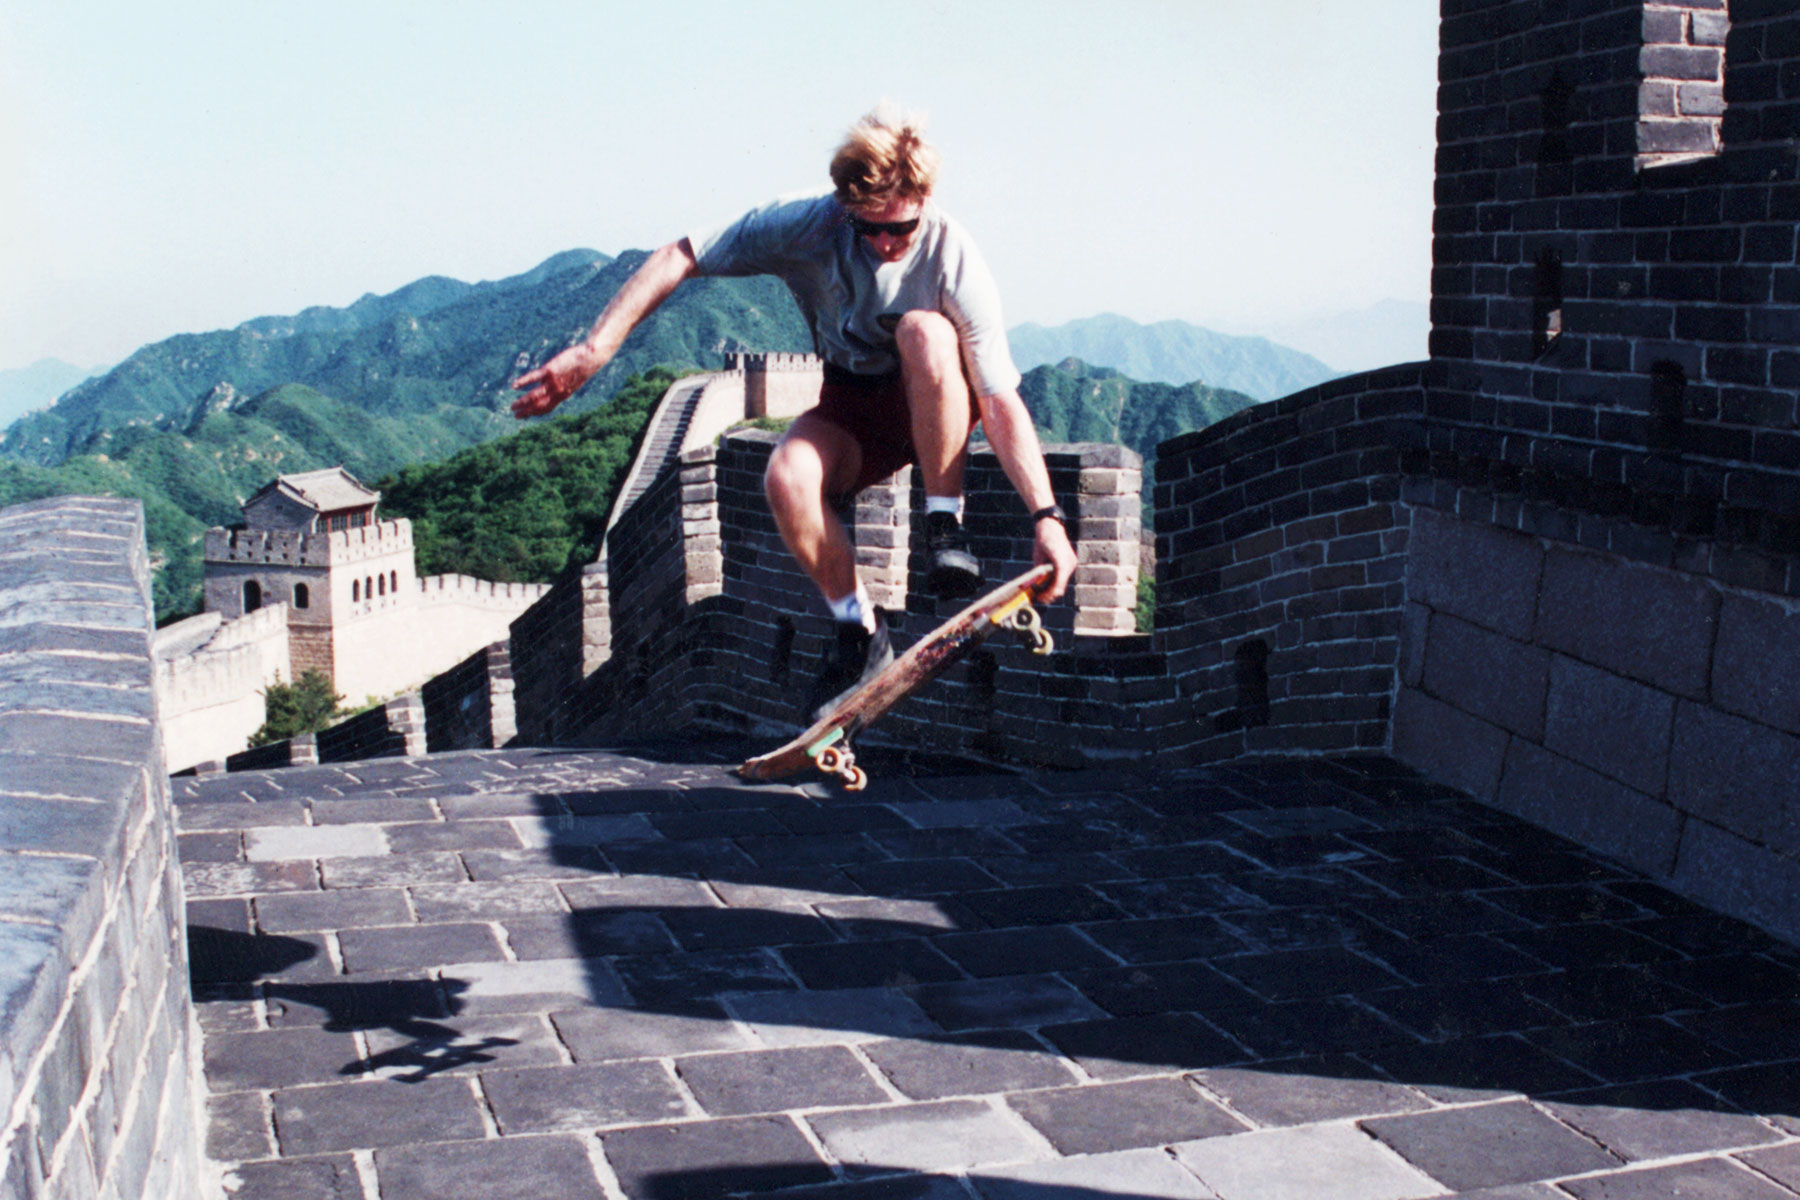 Skateboarding on the Great Wall of China | Surf Doctor Steven Andrew Martin | Skate the Wall | Study Abroad with Peking University | Badaling Great Wall 八达岭 万里长城